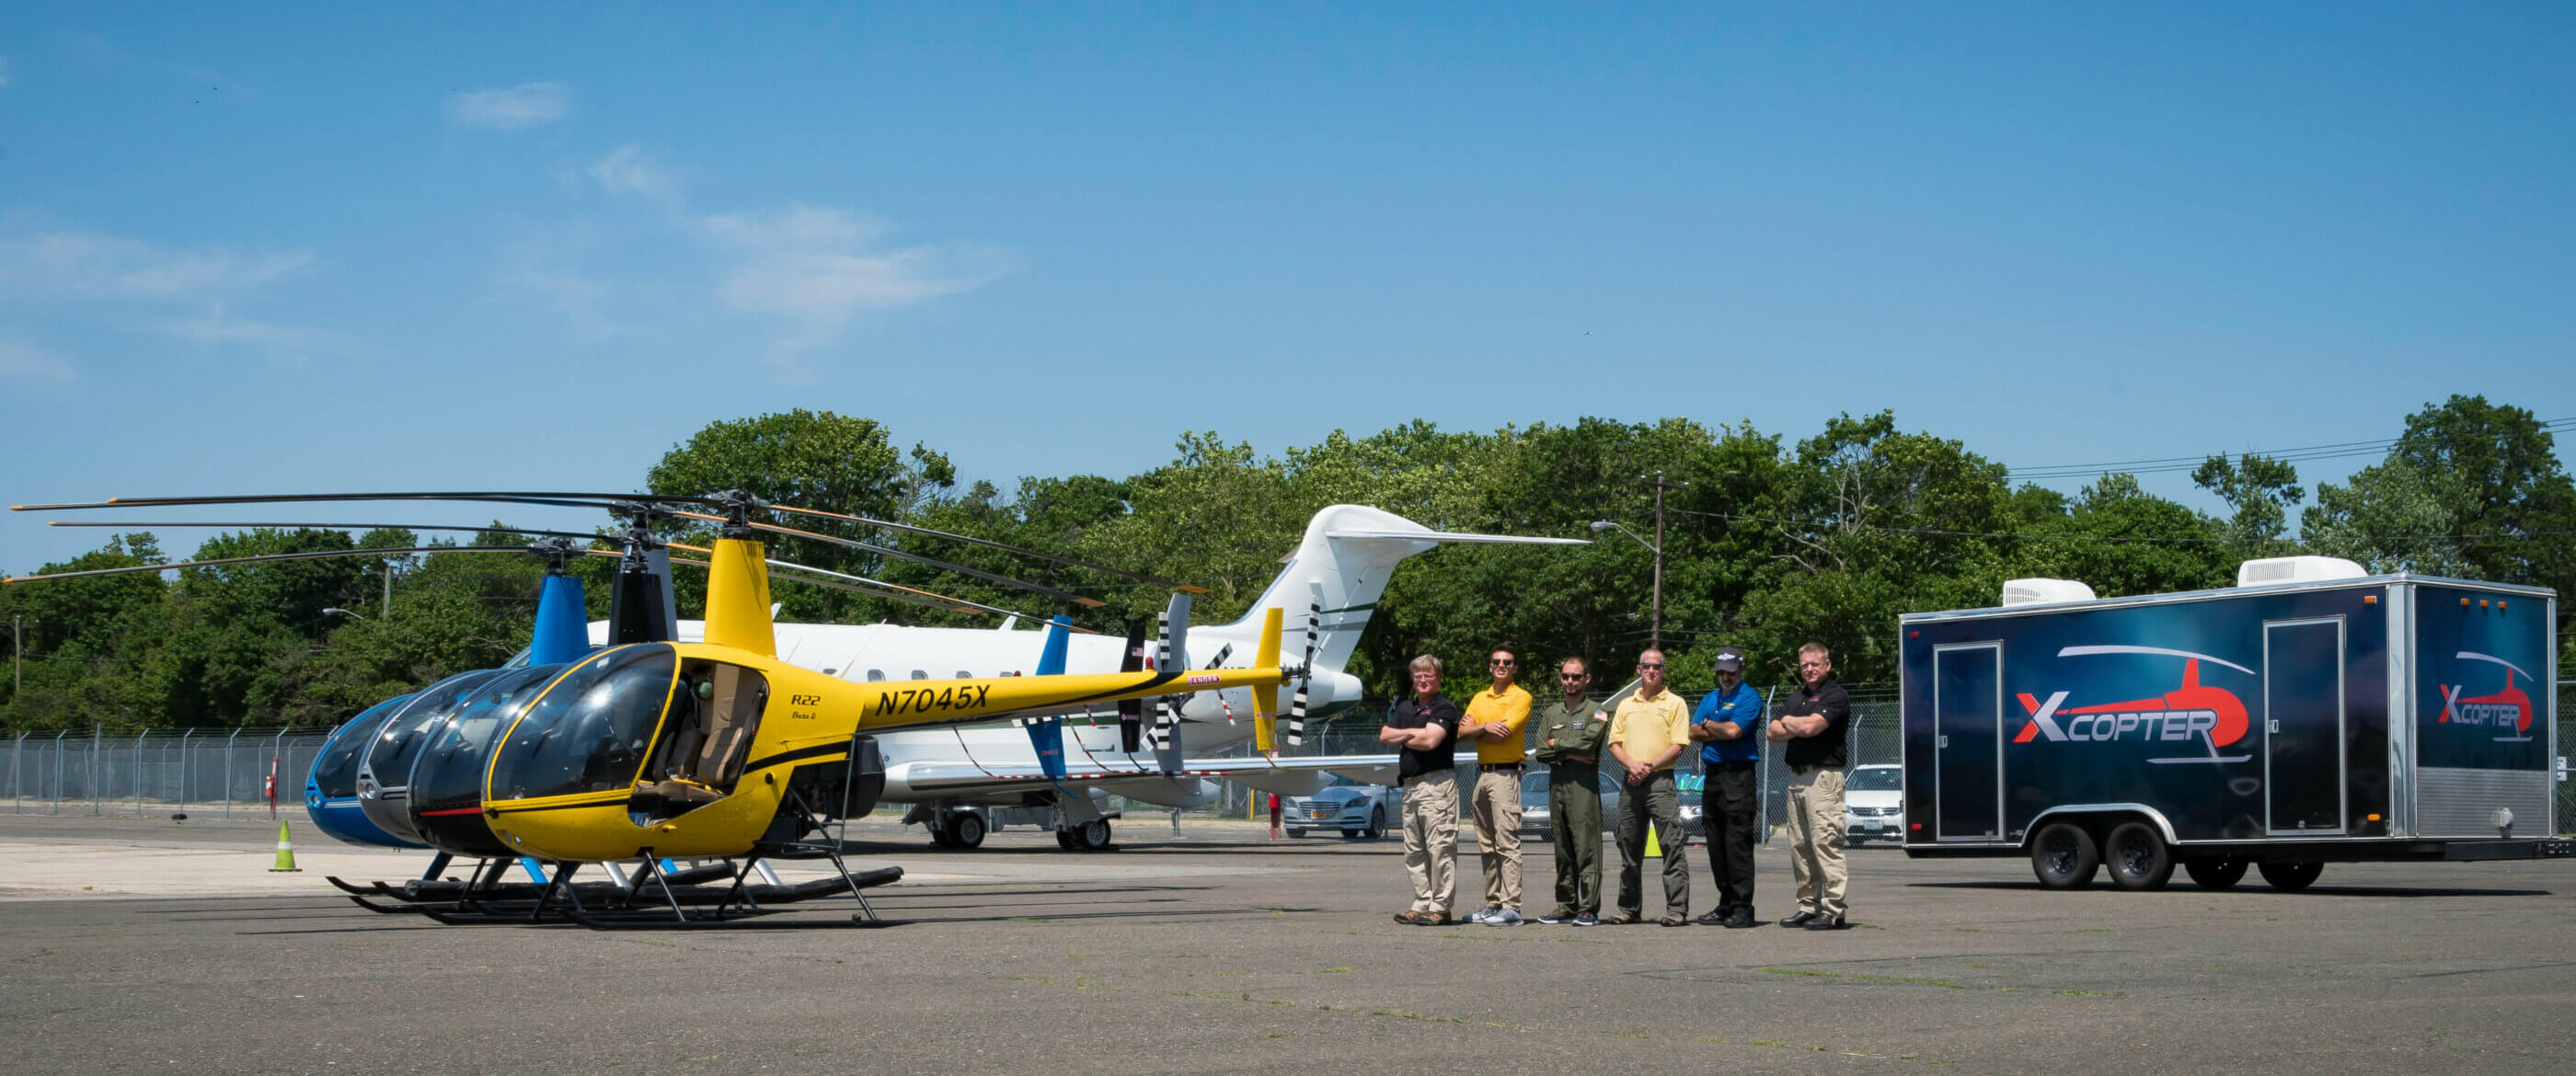 X-Copter delivers Robinson Helicopter simulator to customer